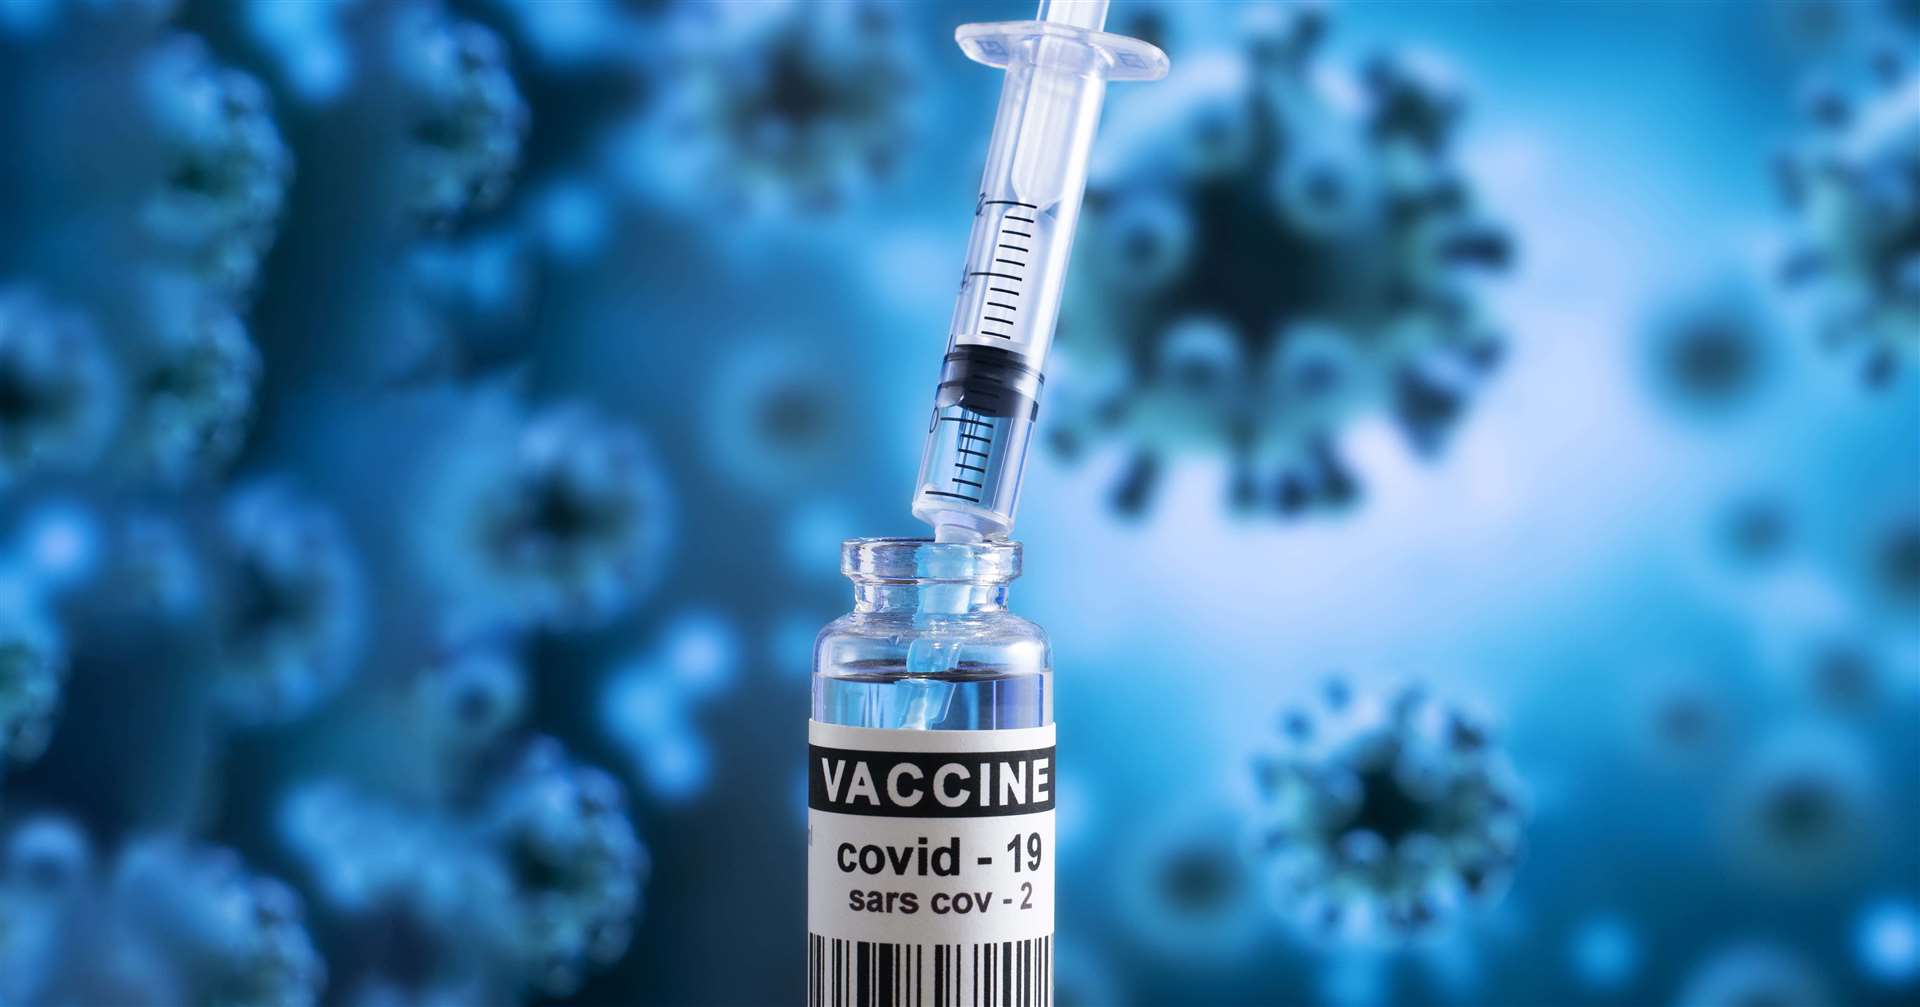 Covid-19 protection. Vaccine and syringe for injection. Stock image.